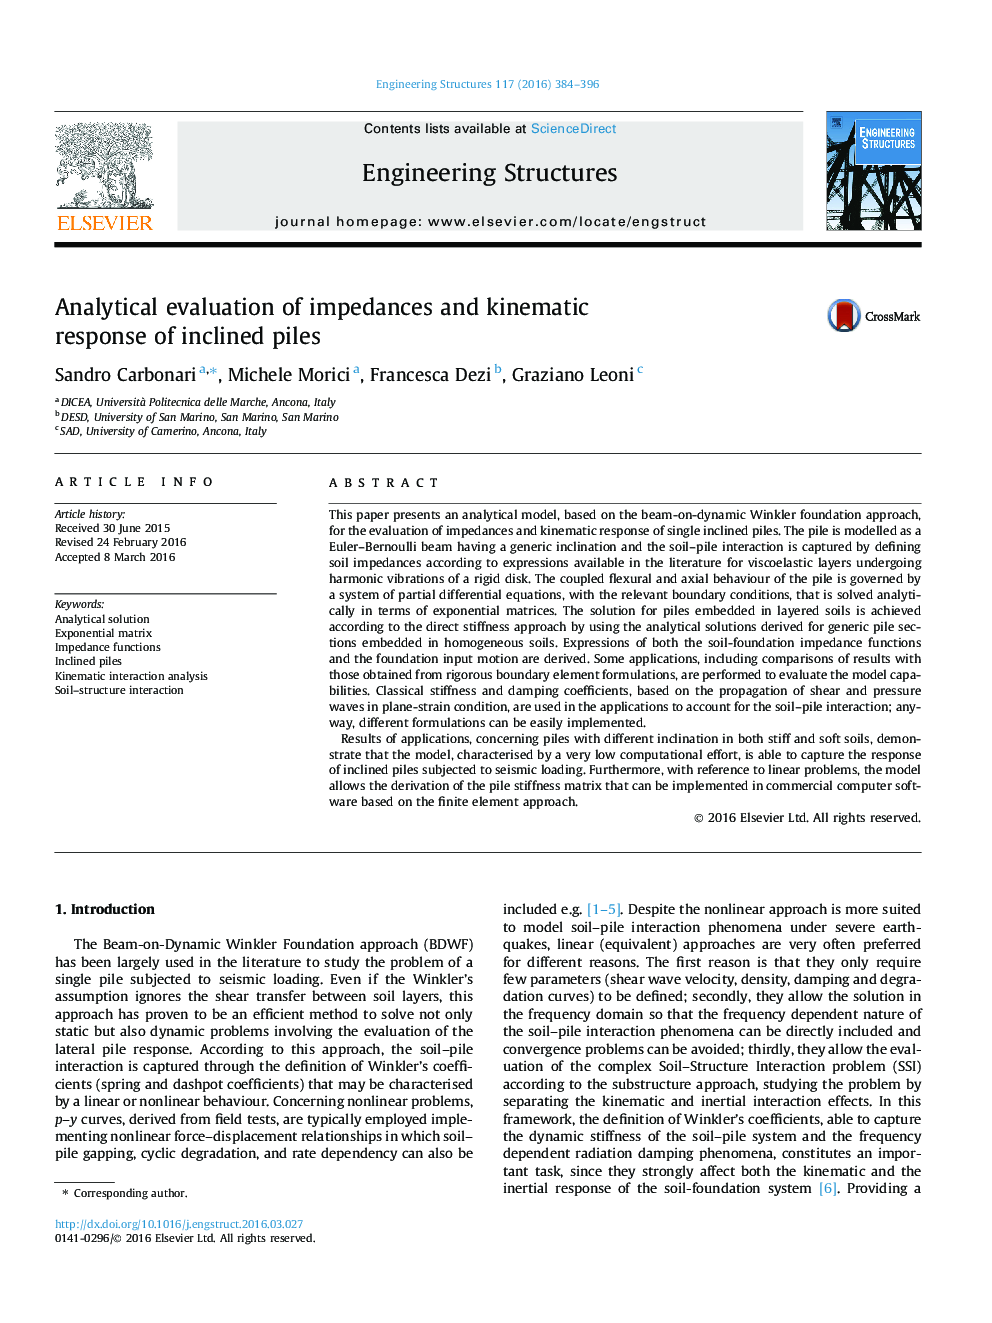 Analytical evaluation of impedances and kinematic response of inclined piles